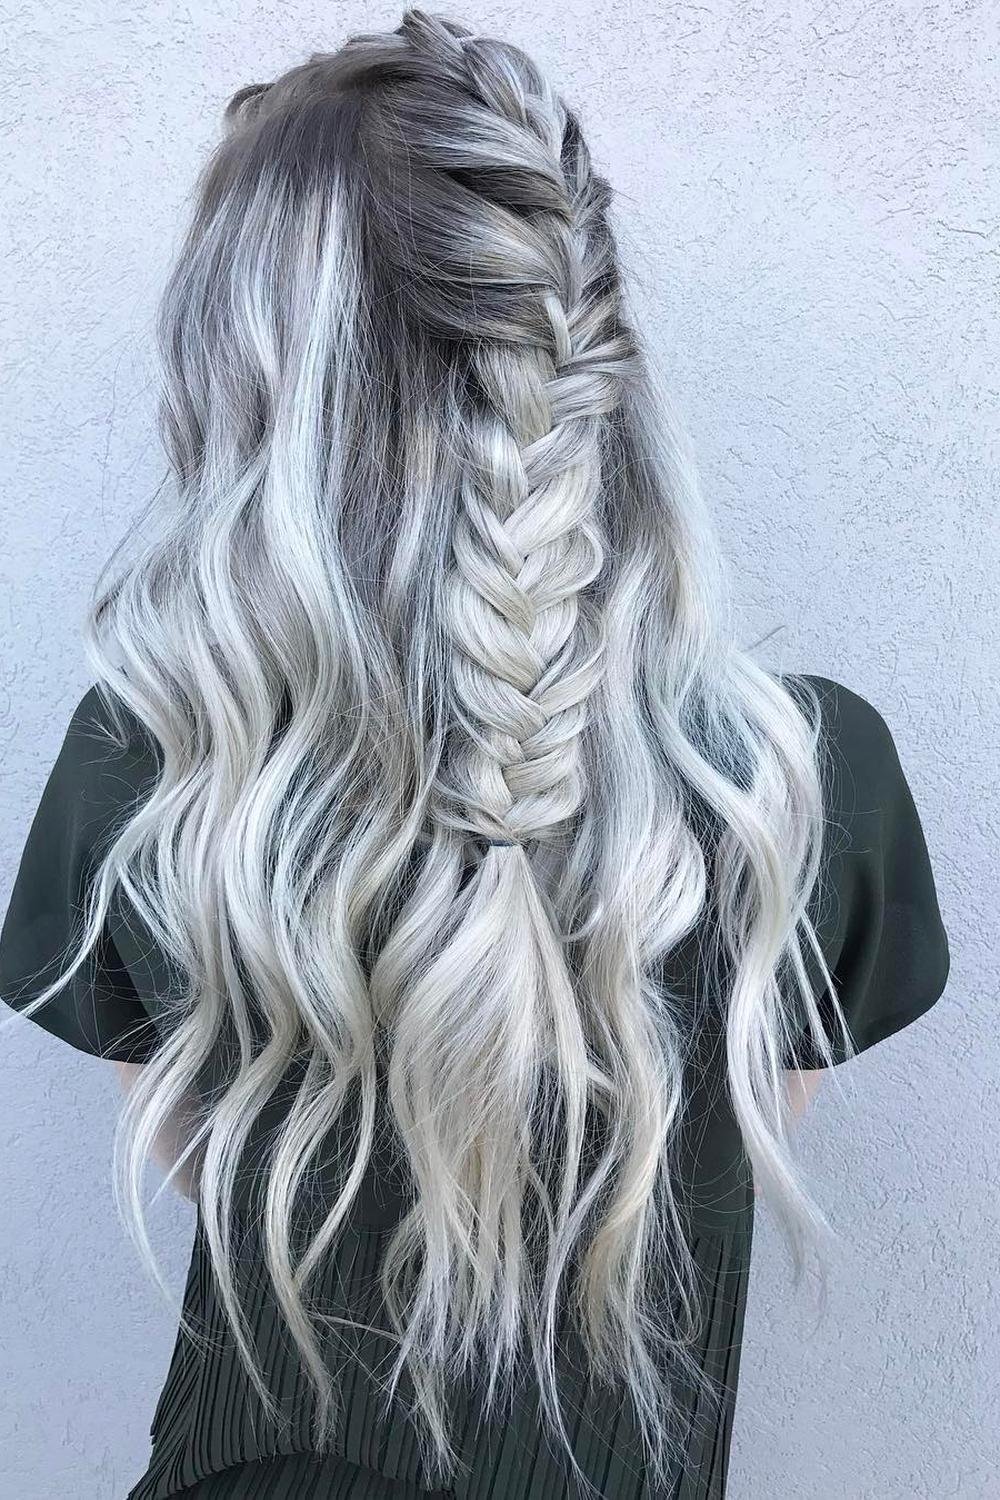 39 - Picture of Braided Hairstyles